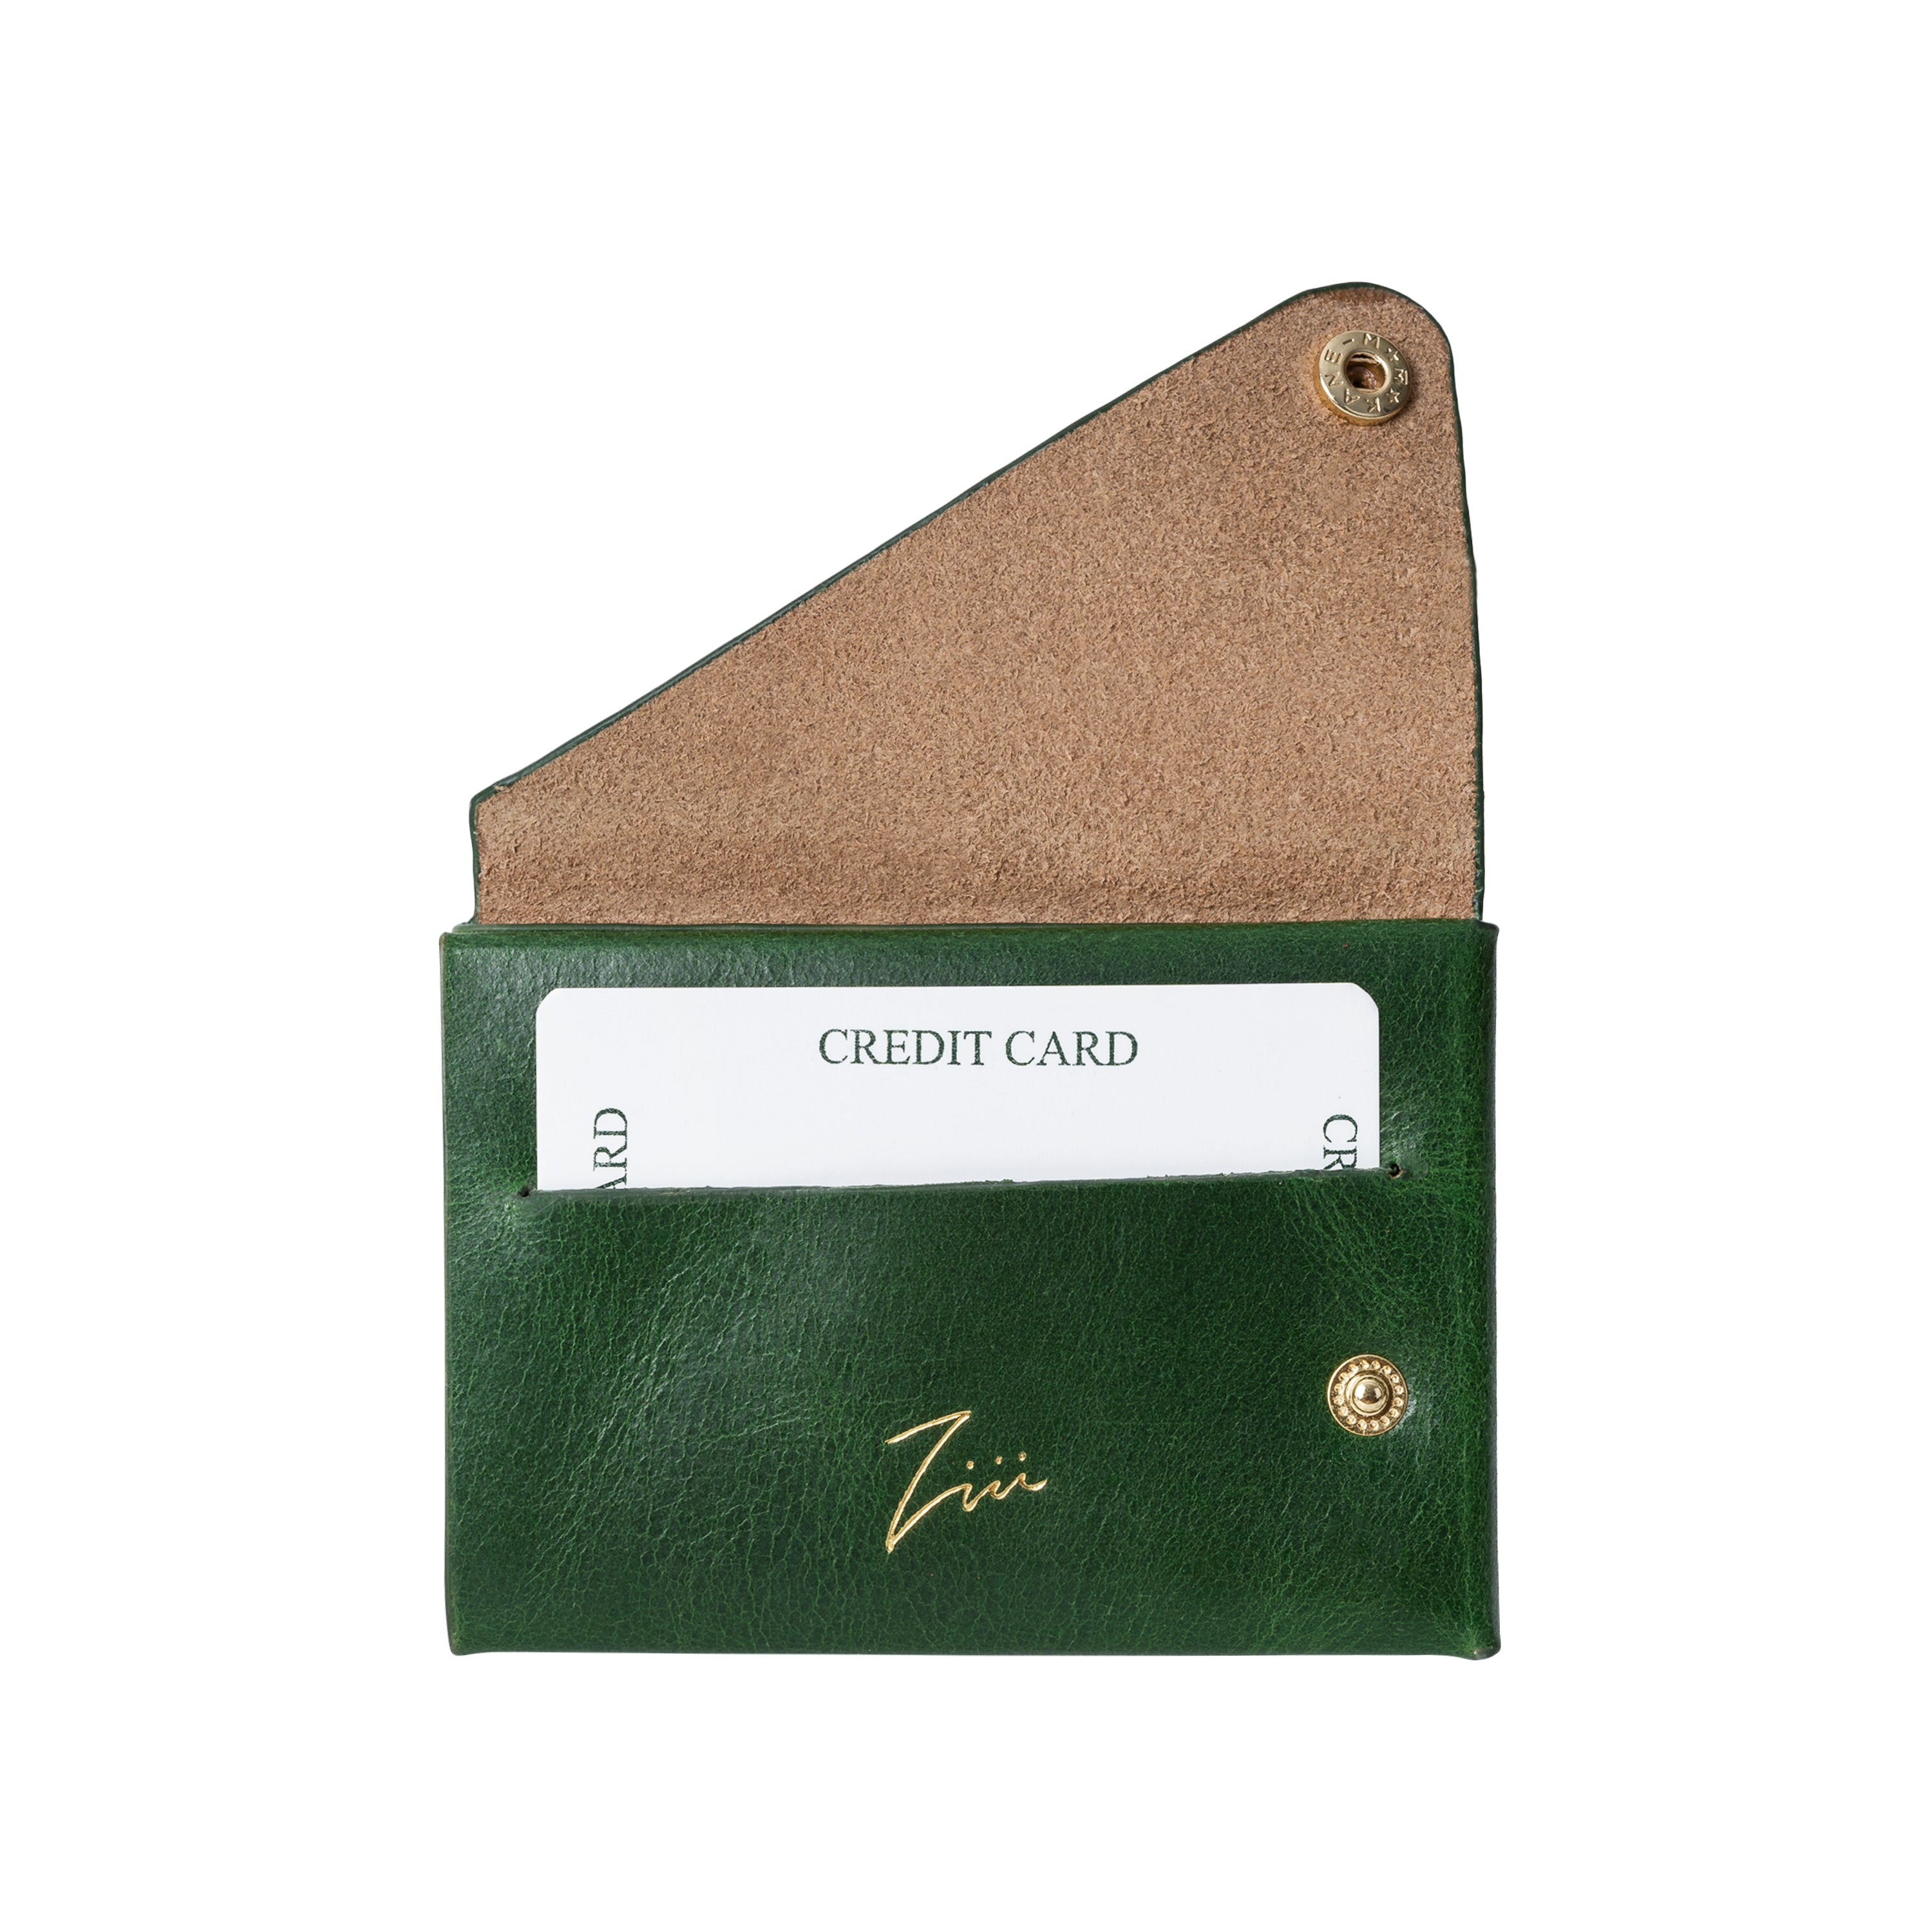 Beck Leather Card / Coin Wallet – beck.bags